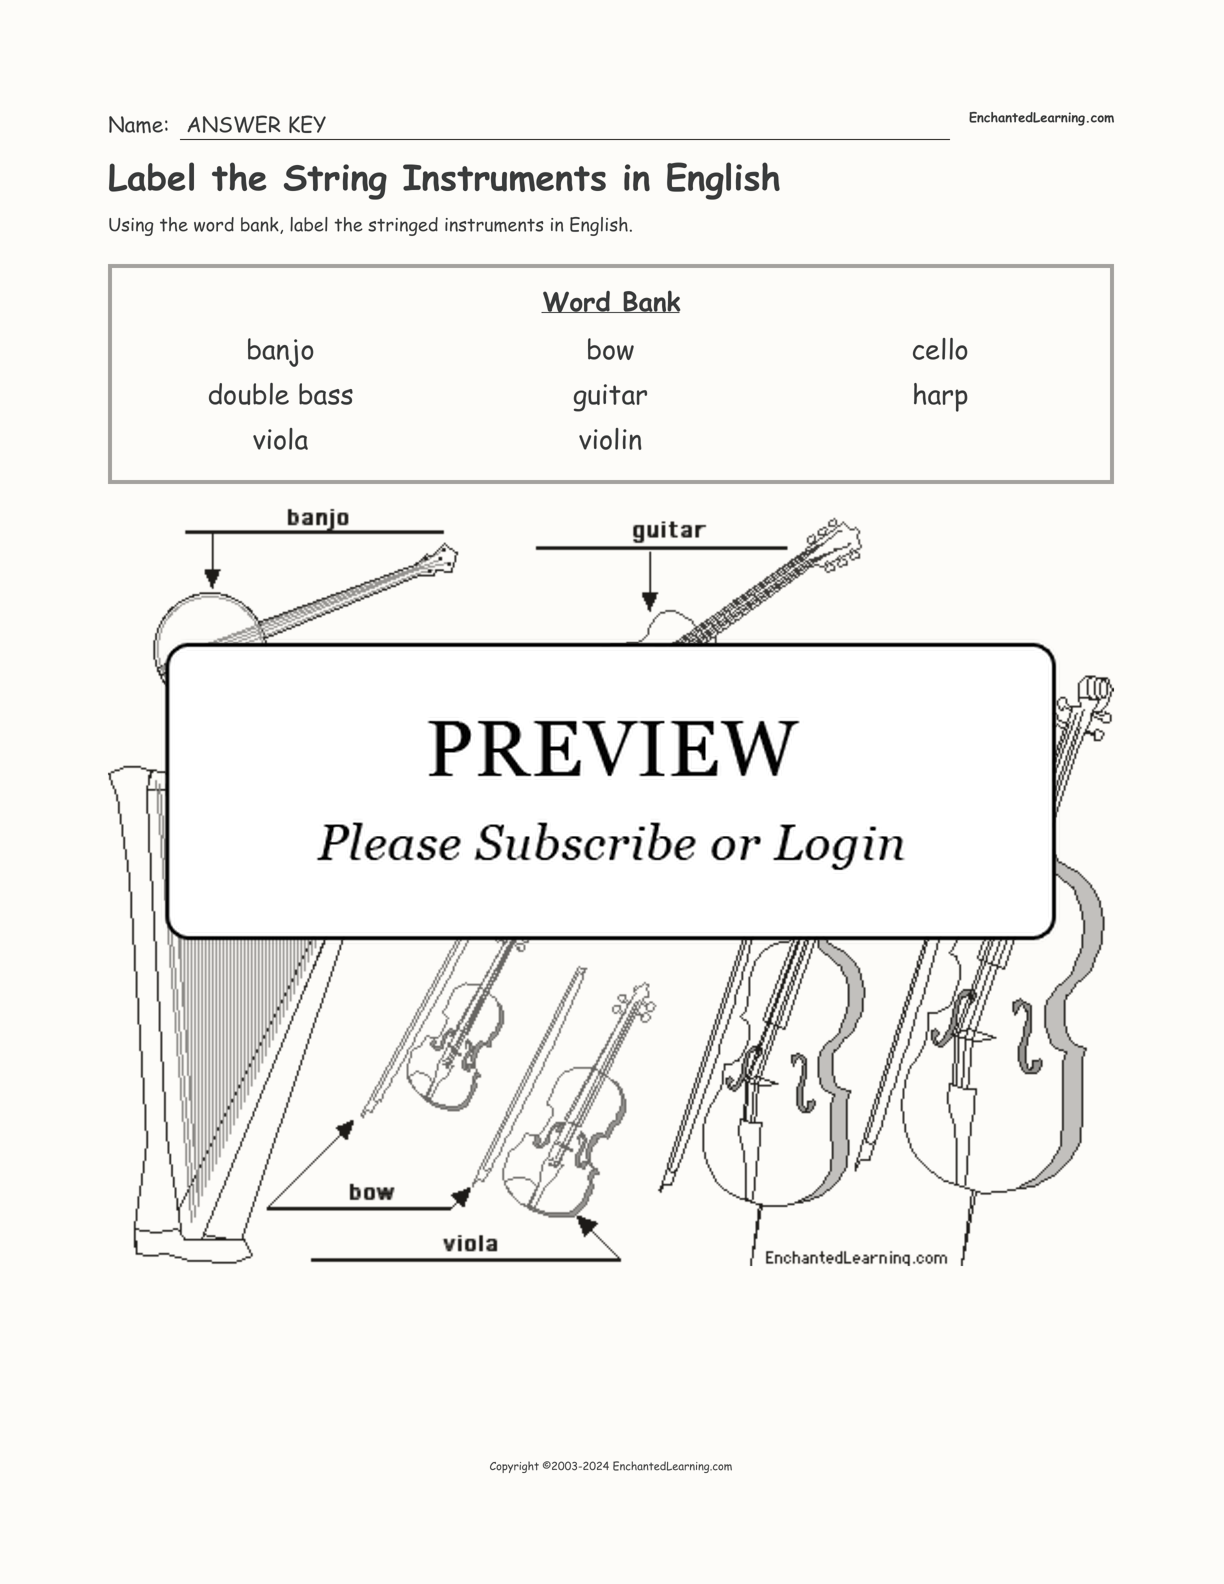 Label the String Instruments in English interactive worksheet page 2